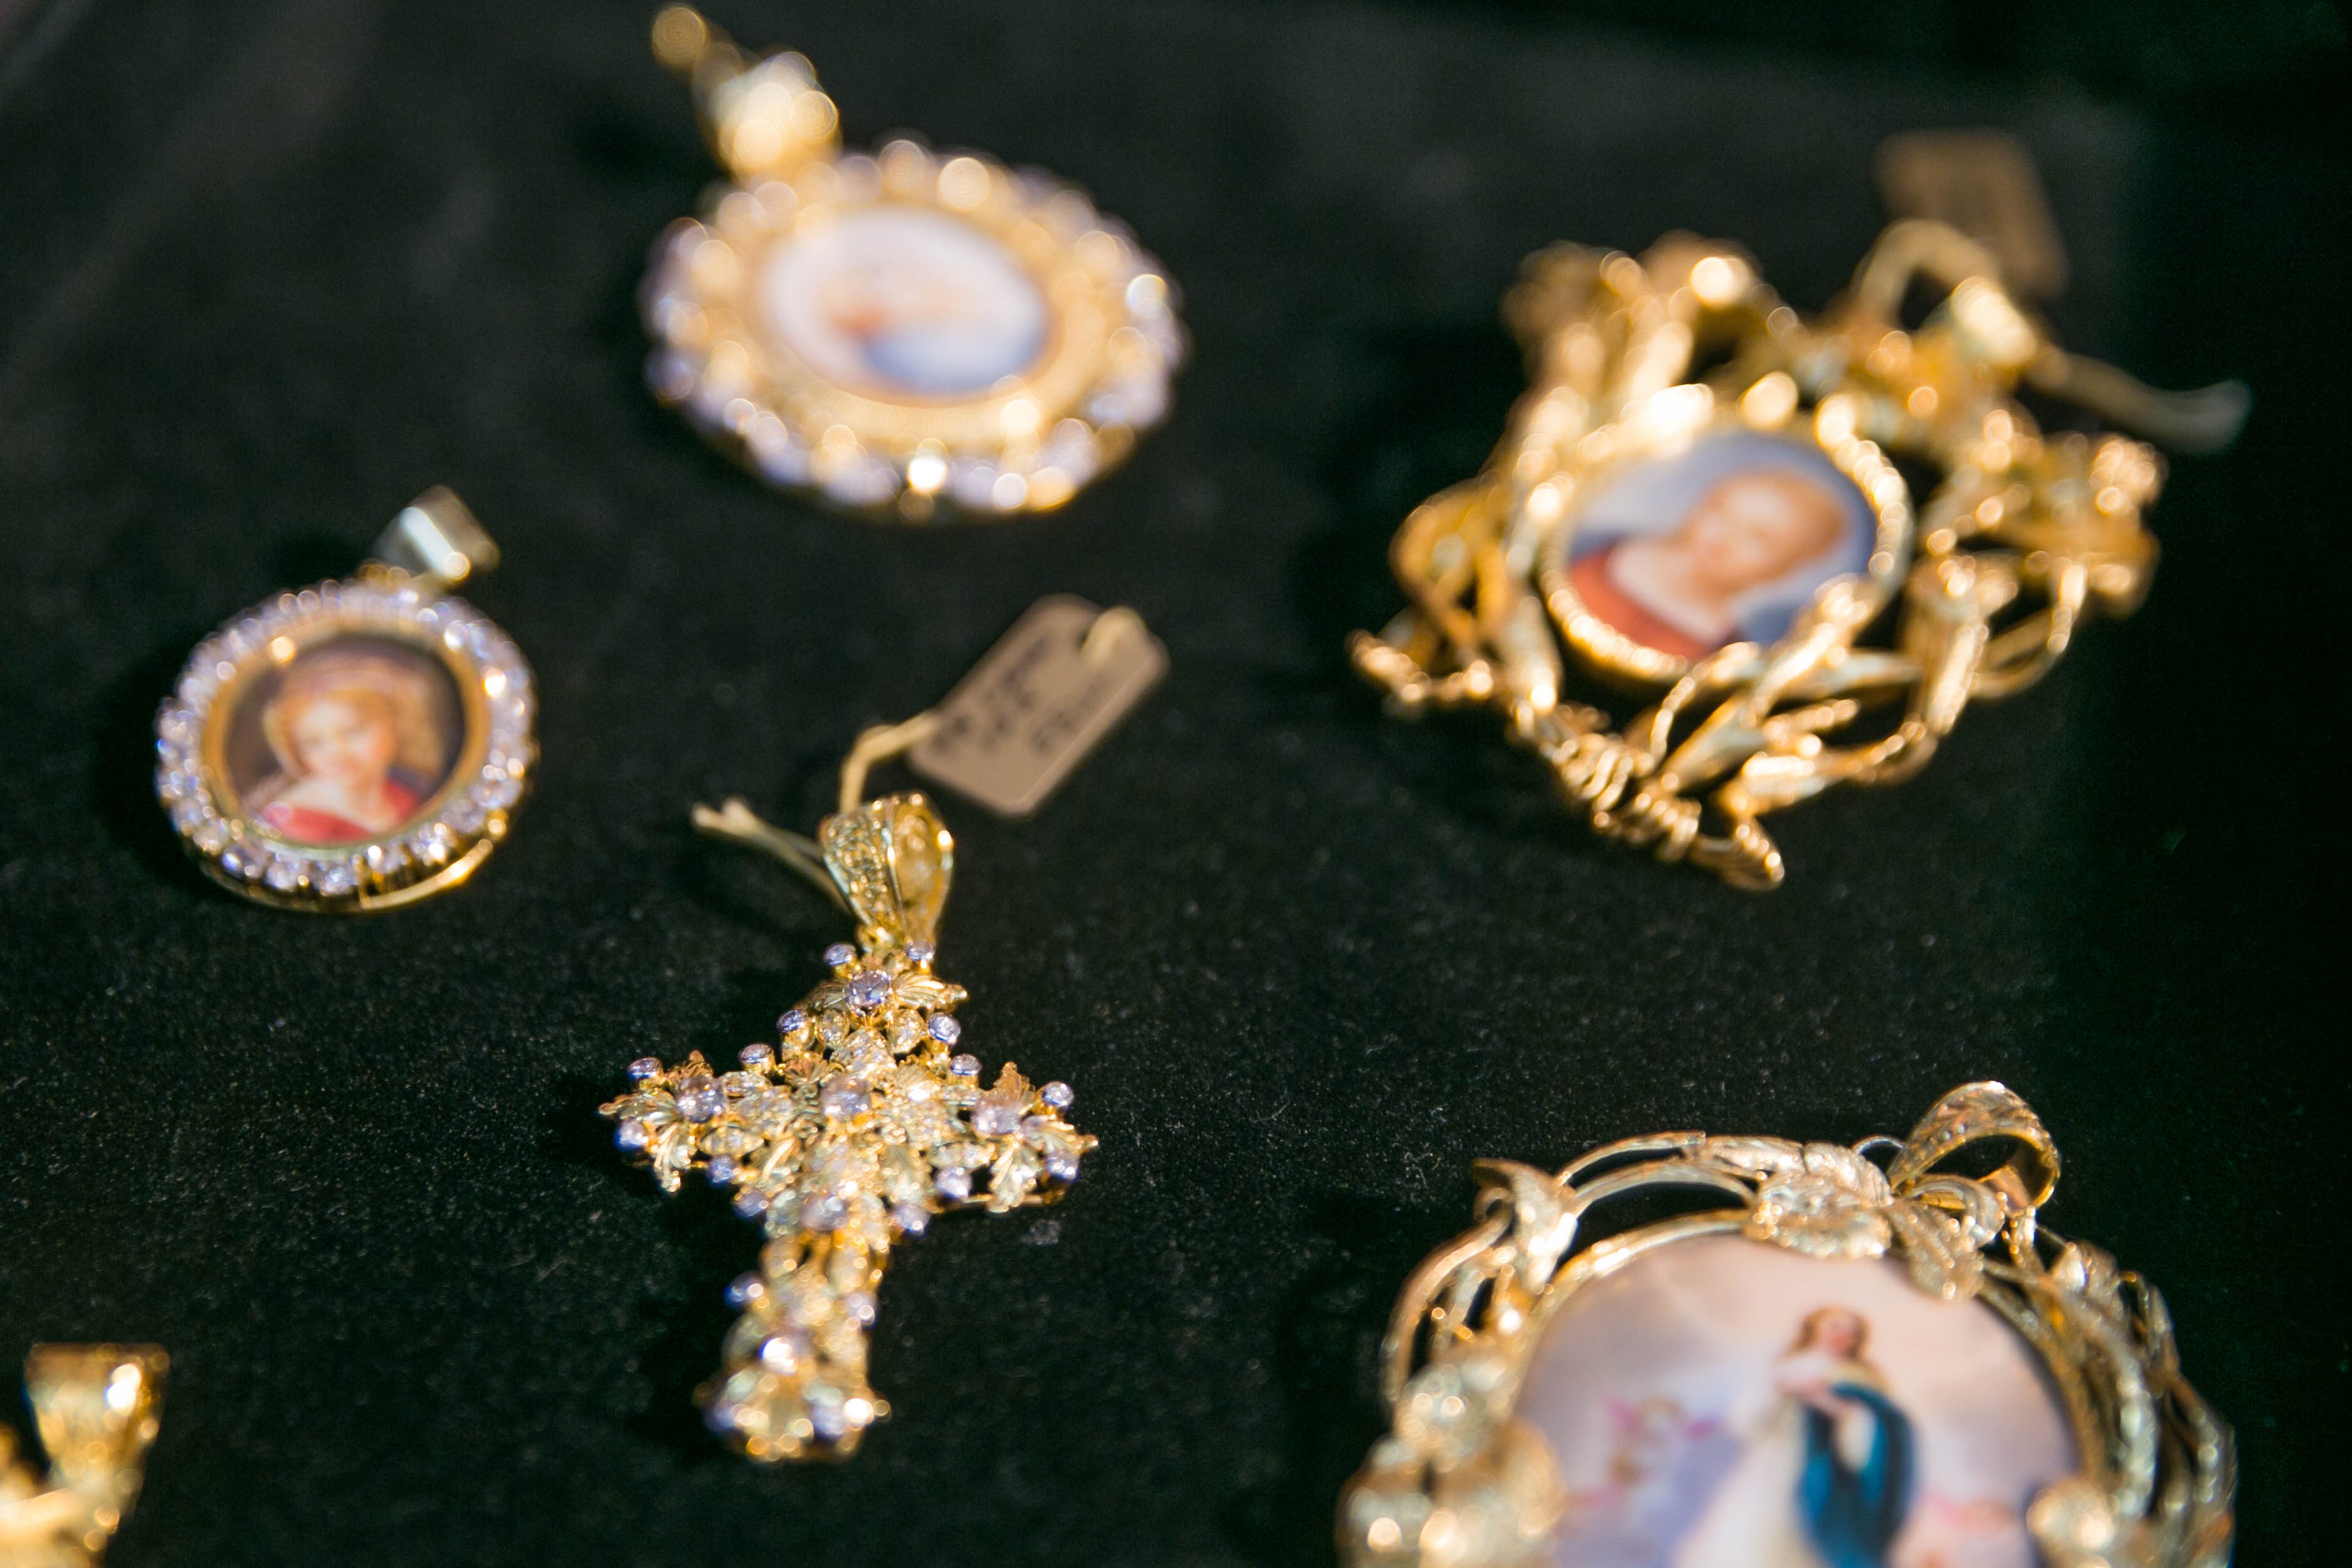 ANTIQUE. Maria Angelica sells religious pendants that date back to the Spanish occupation in the Philippines. Photo by Pat Nabong/Rappler